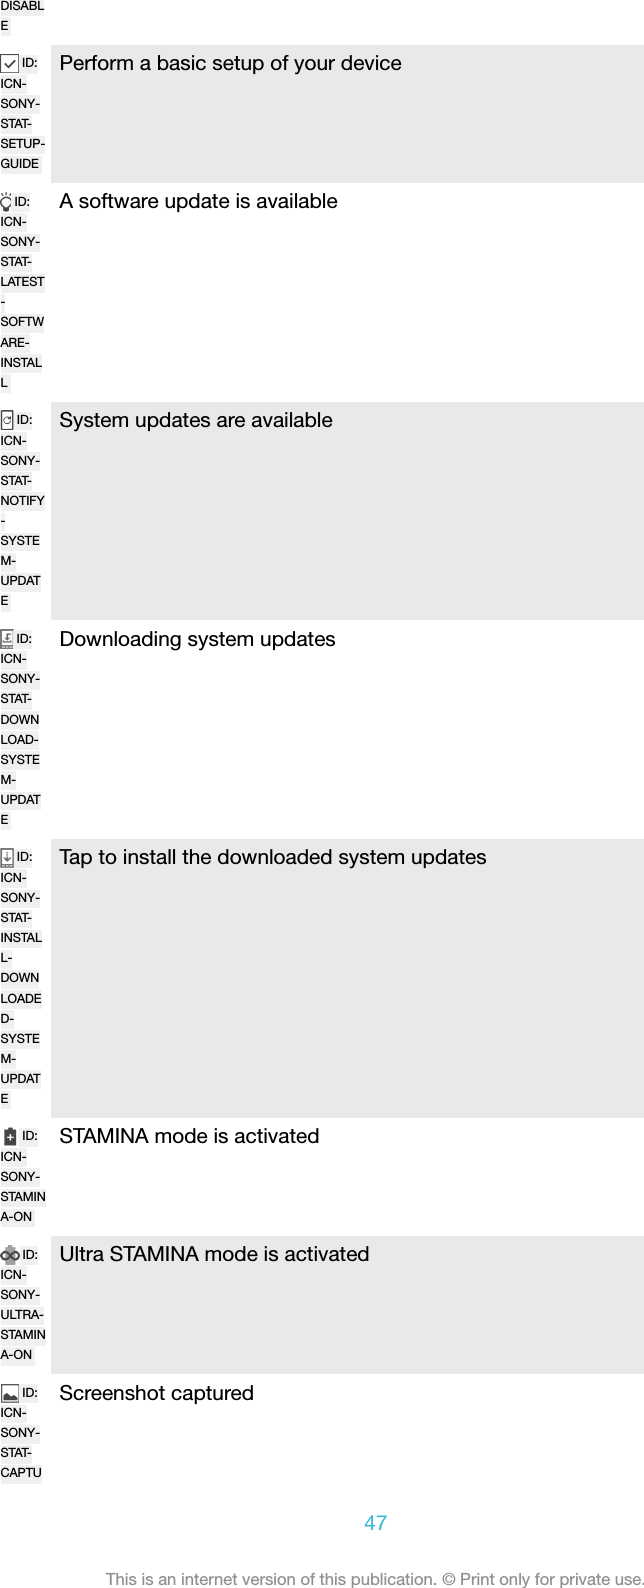 DISABLEID:ICN-SONY-STAT-SETUP-GUIDEPerform a basic setup of your deviceID:ICN-SONY-STAT-LATEST-SOFTWARE-INSTALLA software update is availableID:ICN-SONY-STAT-NOTIFY-SYSTEM-UPDATESystem updates are availableID:ICN-SONY-STAT-DOWNLOAD-SYSTEM-UPDATEDownloading system updatesID:ICN-SONY-STAT-INSTALL-DOWNLOADED-SYSTEM-UPDATETap to install the downloaded system updatesID:ICN-SONY-STAMINA-ONSTAMINA mode is activatedID:ICN-SONY-ULTRA-STAMINA-ONUltra STAMINA mode is activatedID:ICN-SONY-STAT-CAPTUScreenshot captured47This is an internet version of this publication. © Print only for private use.